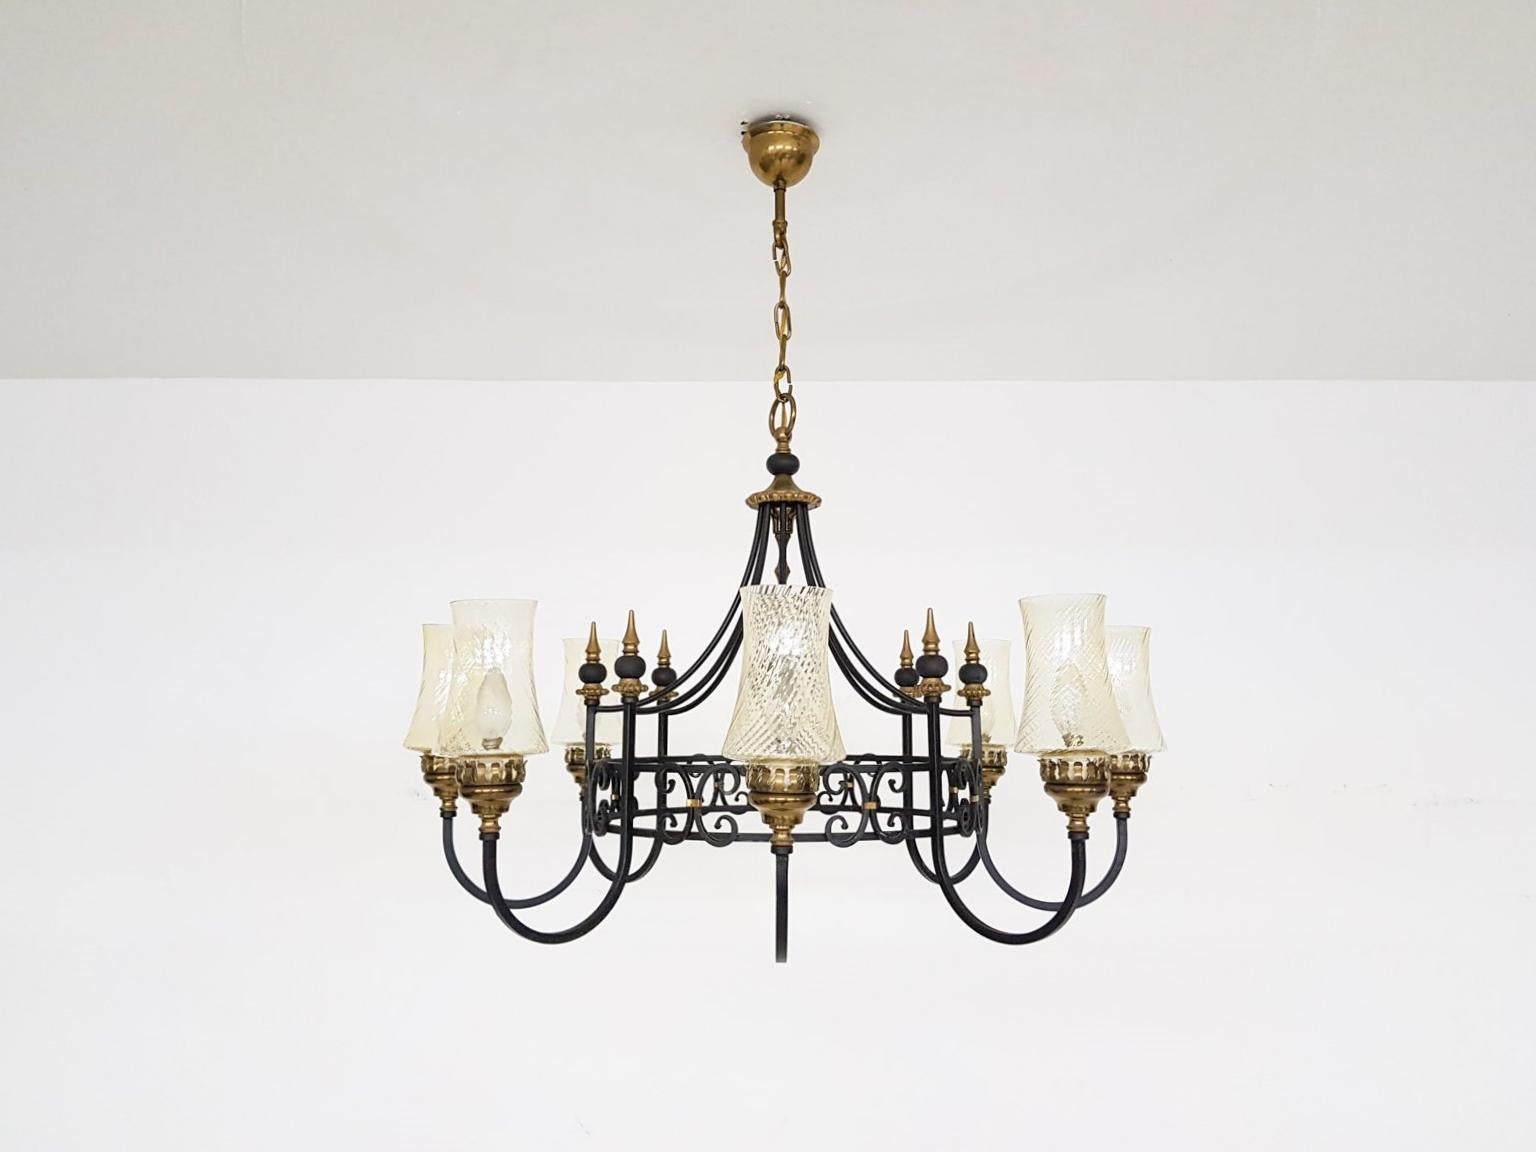 Impressive black iron chandelier with brass details and beautiful hand blown glass chalices from the 1930s.

This chandelier had a prominent place above a large round table in a Dutch mansion. There it hung for almost a 90 years. When we saw its